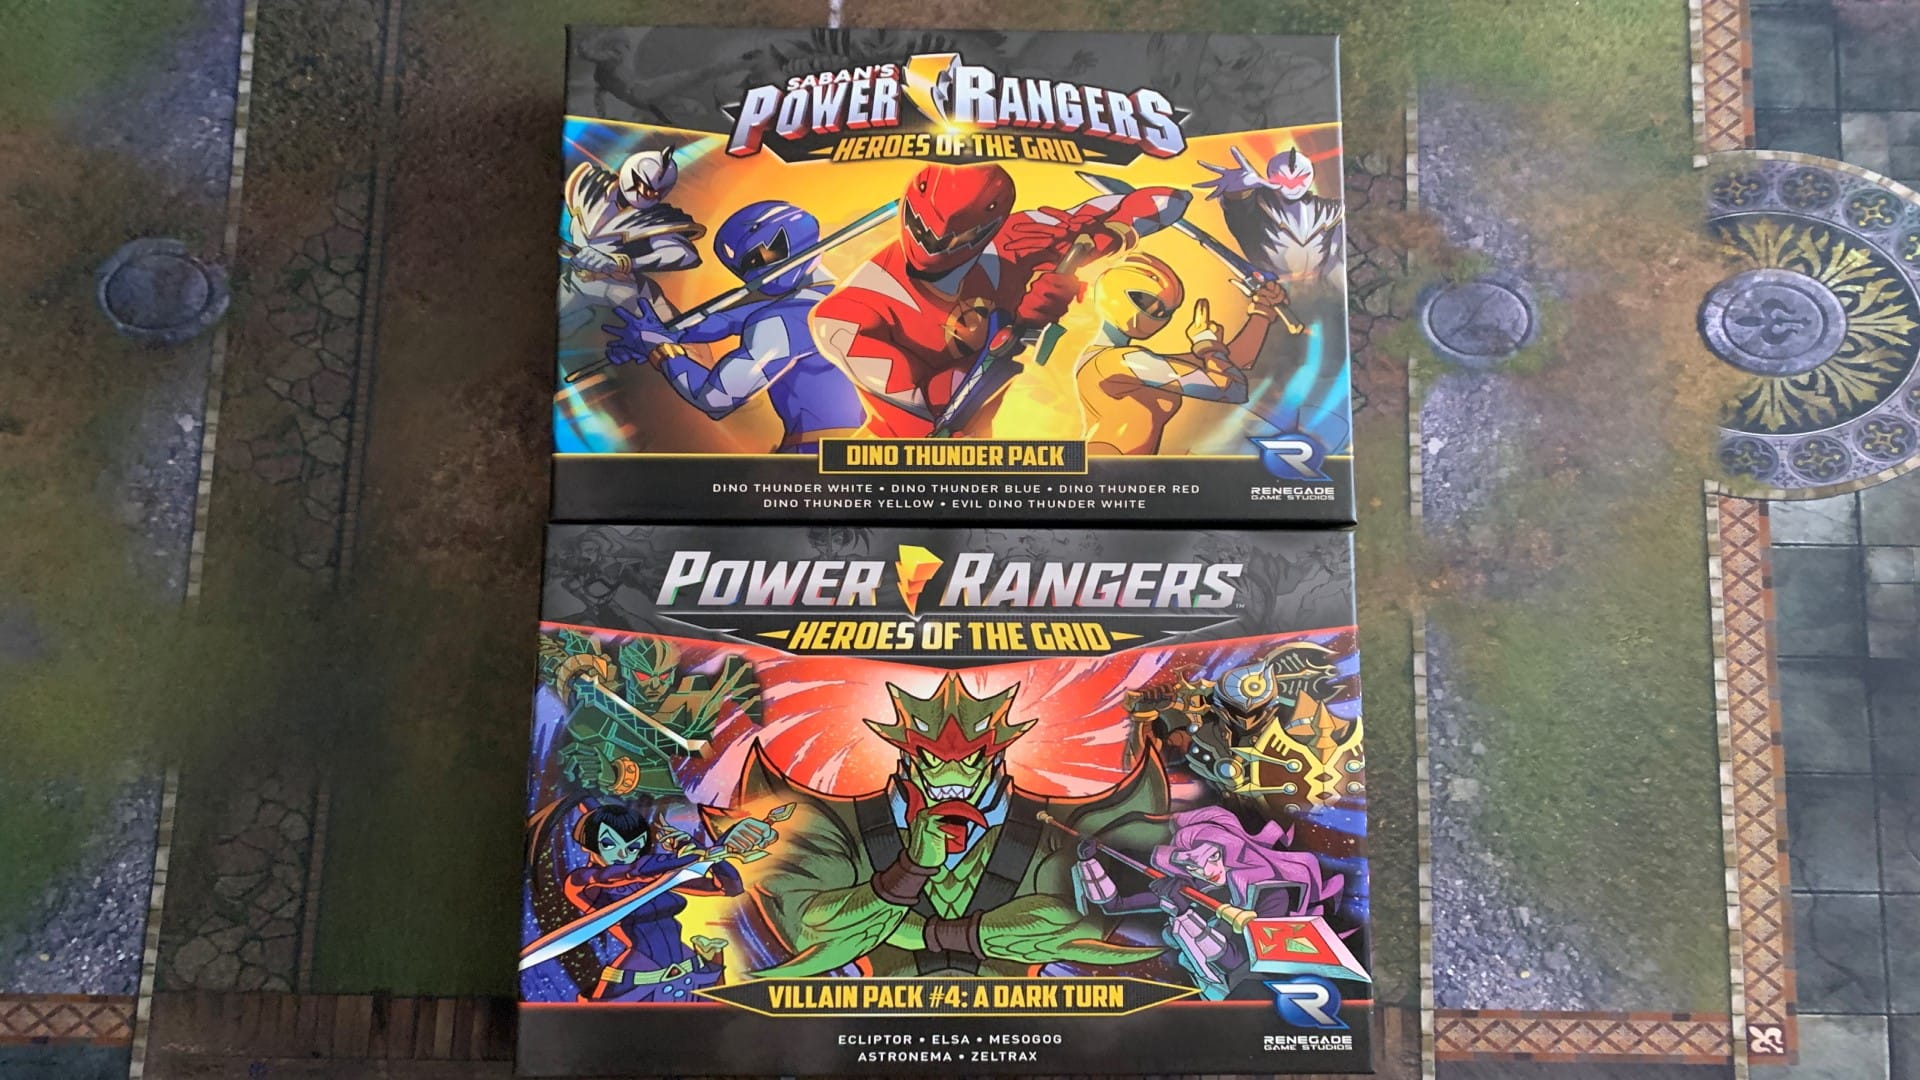 The boxes for the Power Rangers Dino Thunder Pack and Villain Pack 4 on a playmat